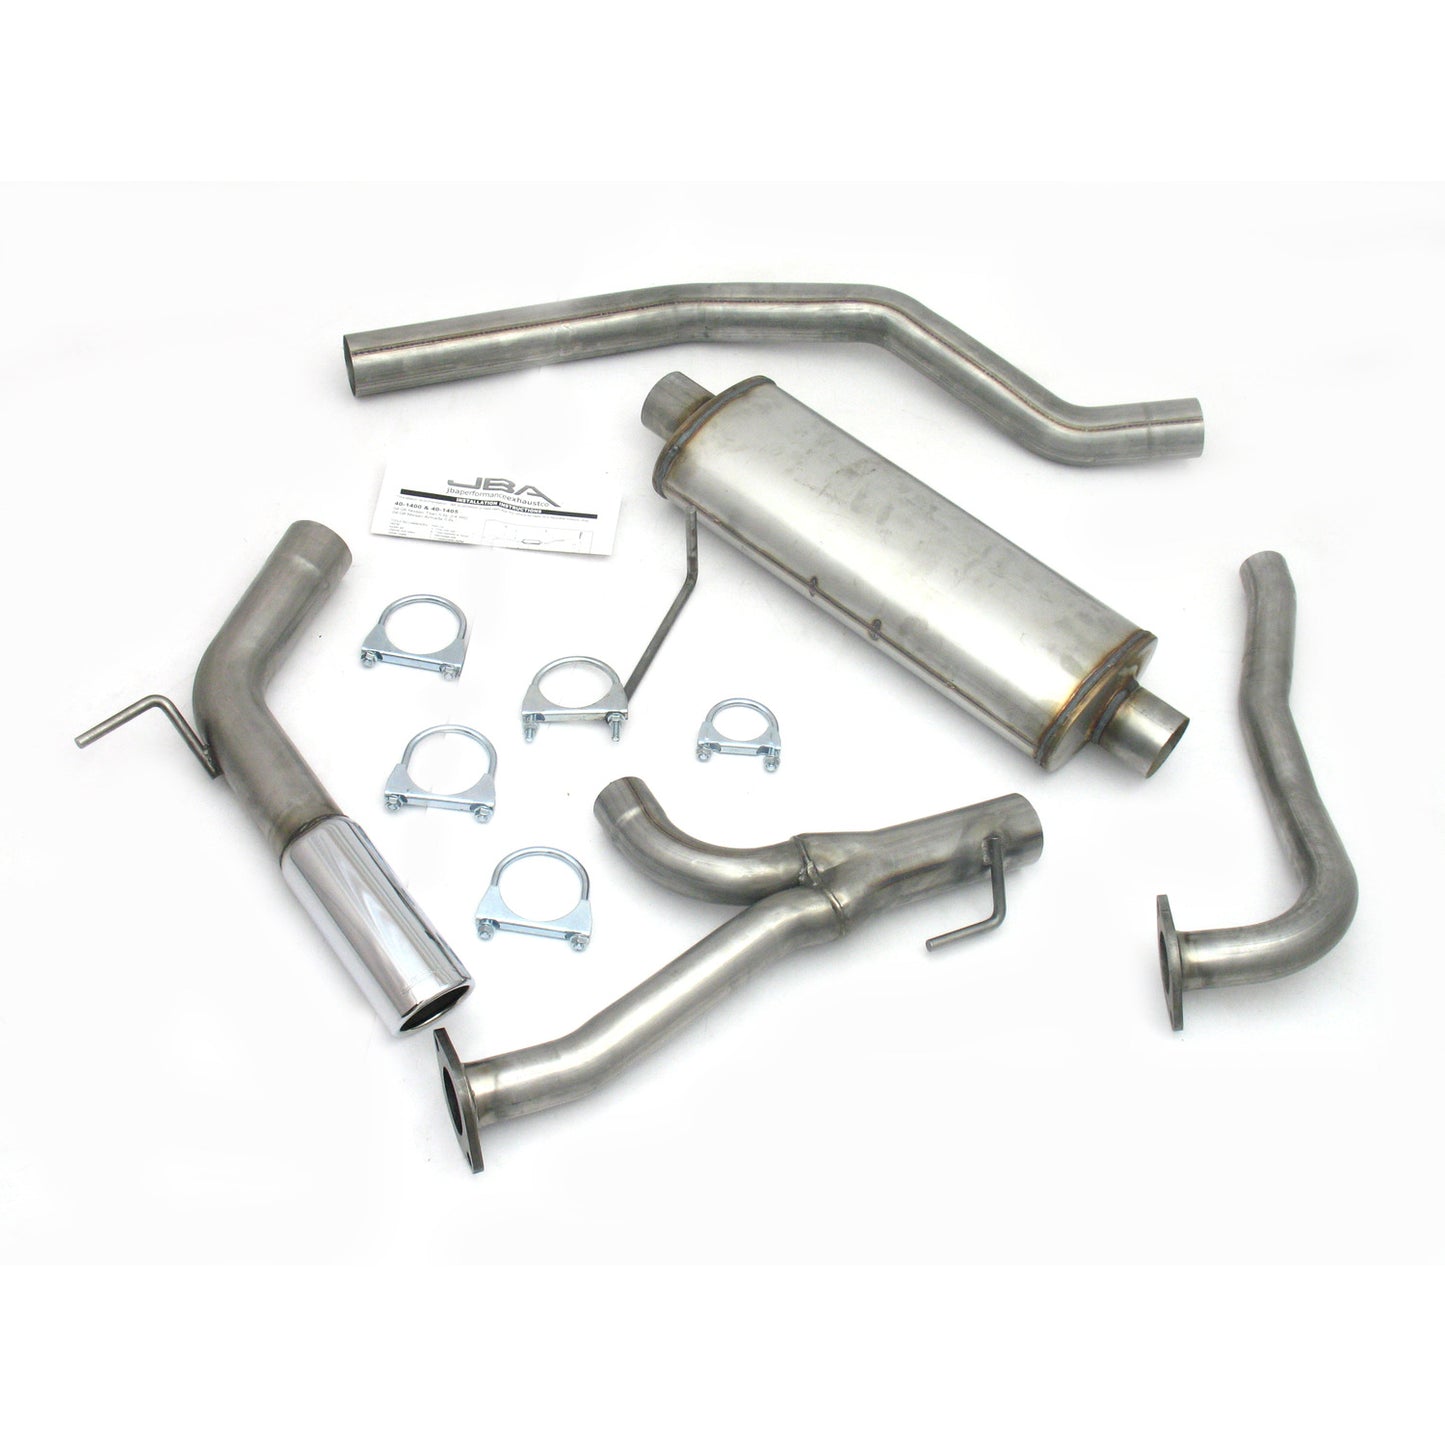 JBA Performance Exhaust 40-1405 3" Stainless Steel Exhaust System 04-14 Nissan Armada 5.6L